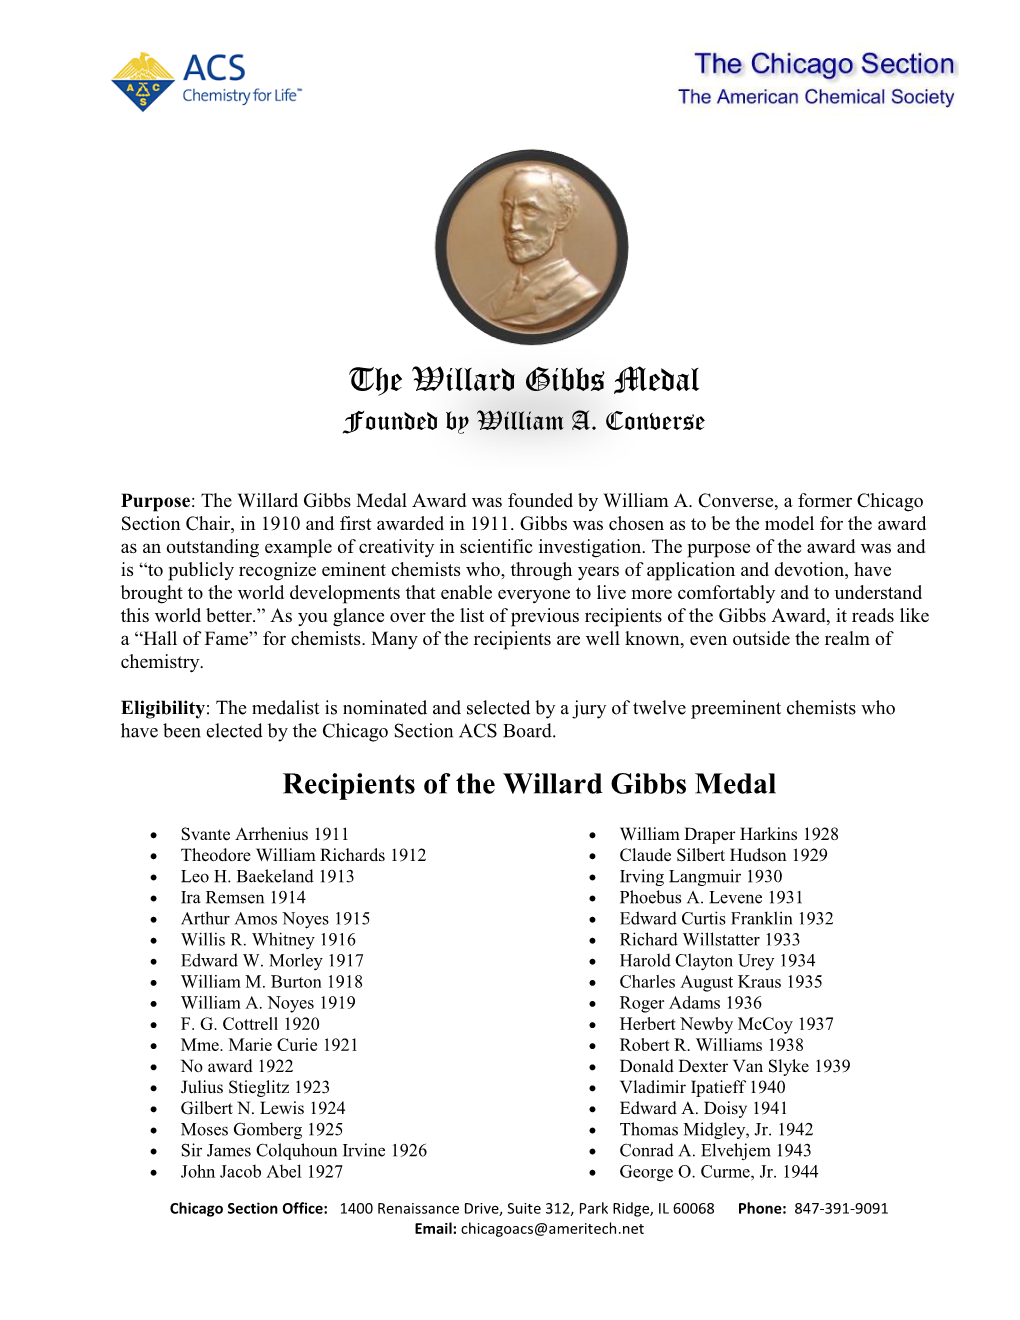 The Willard Gibbs Medal Founded by William A